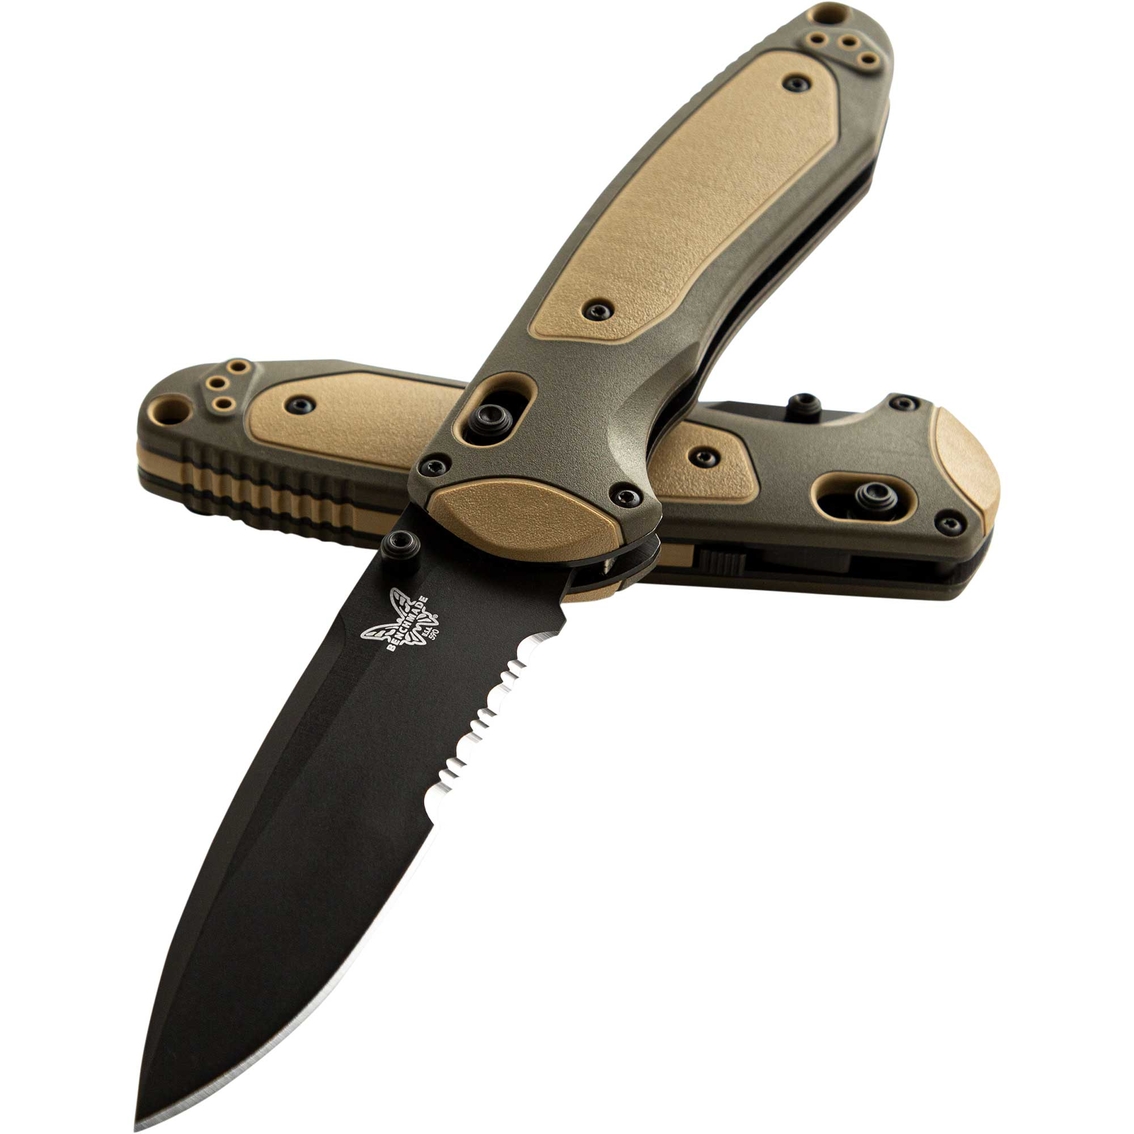 Benchmade Boost 590sbk-1 Federal Government Exclusive Knife | Knives ...